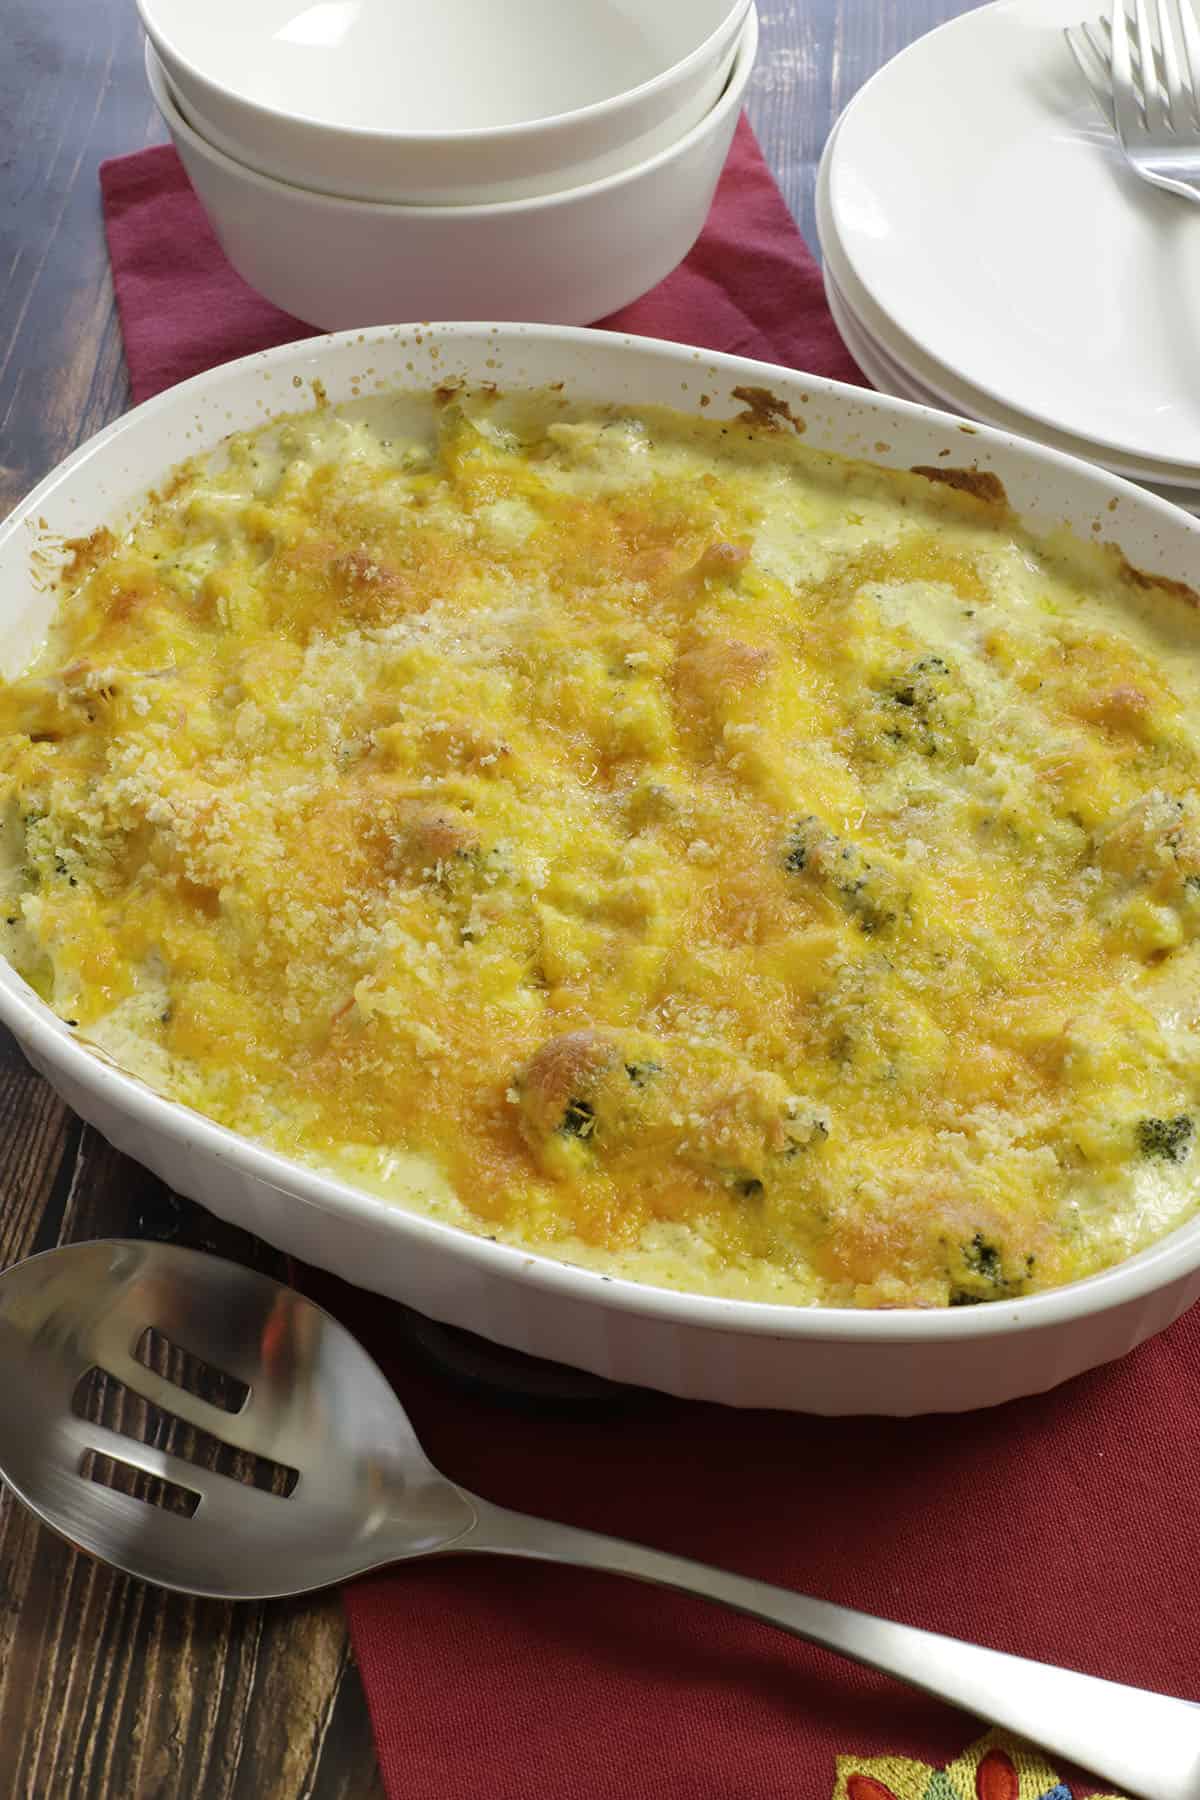 Cheesy baked casserole in oval white dish with silver spoon and red napkin on the side.